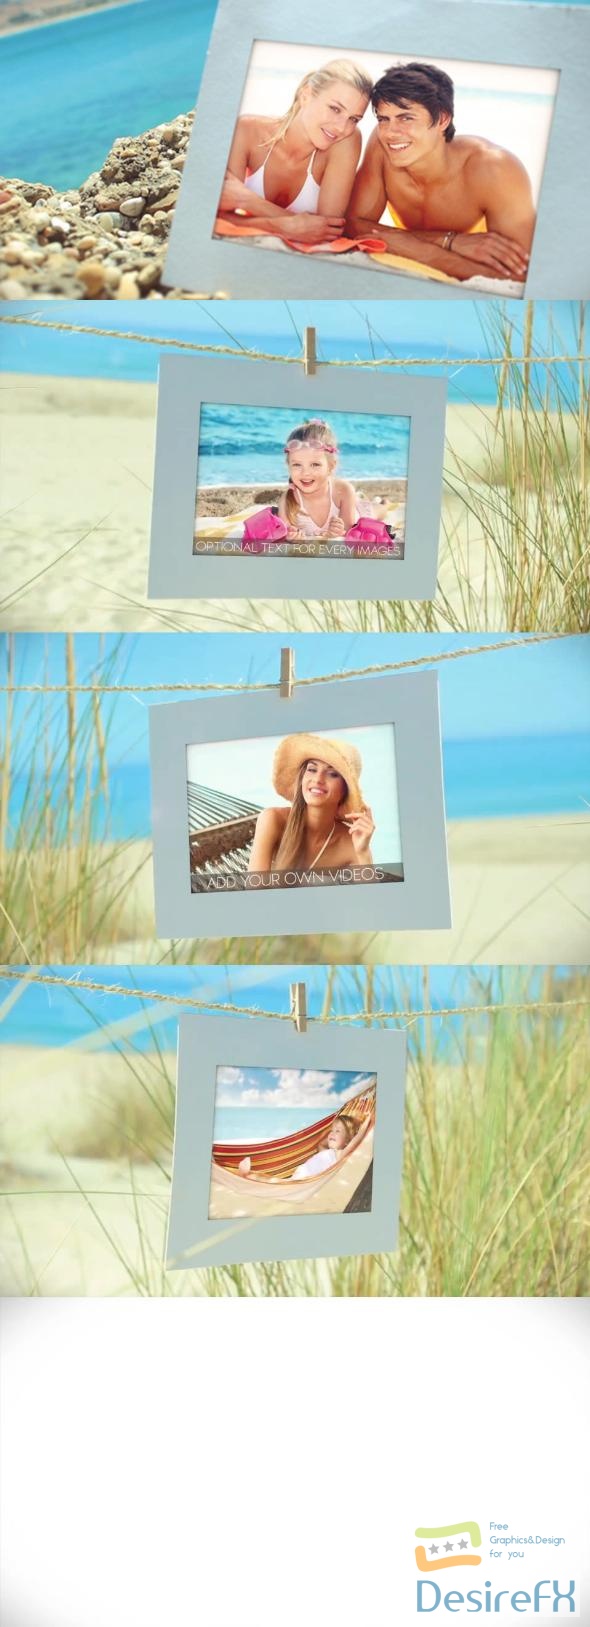 VideoHive Photo Gallery On Summer Holiday 5546763